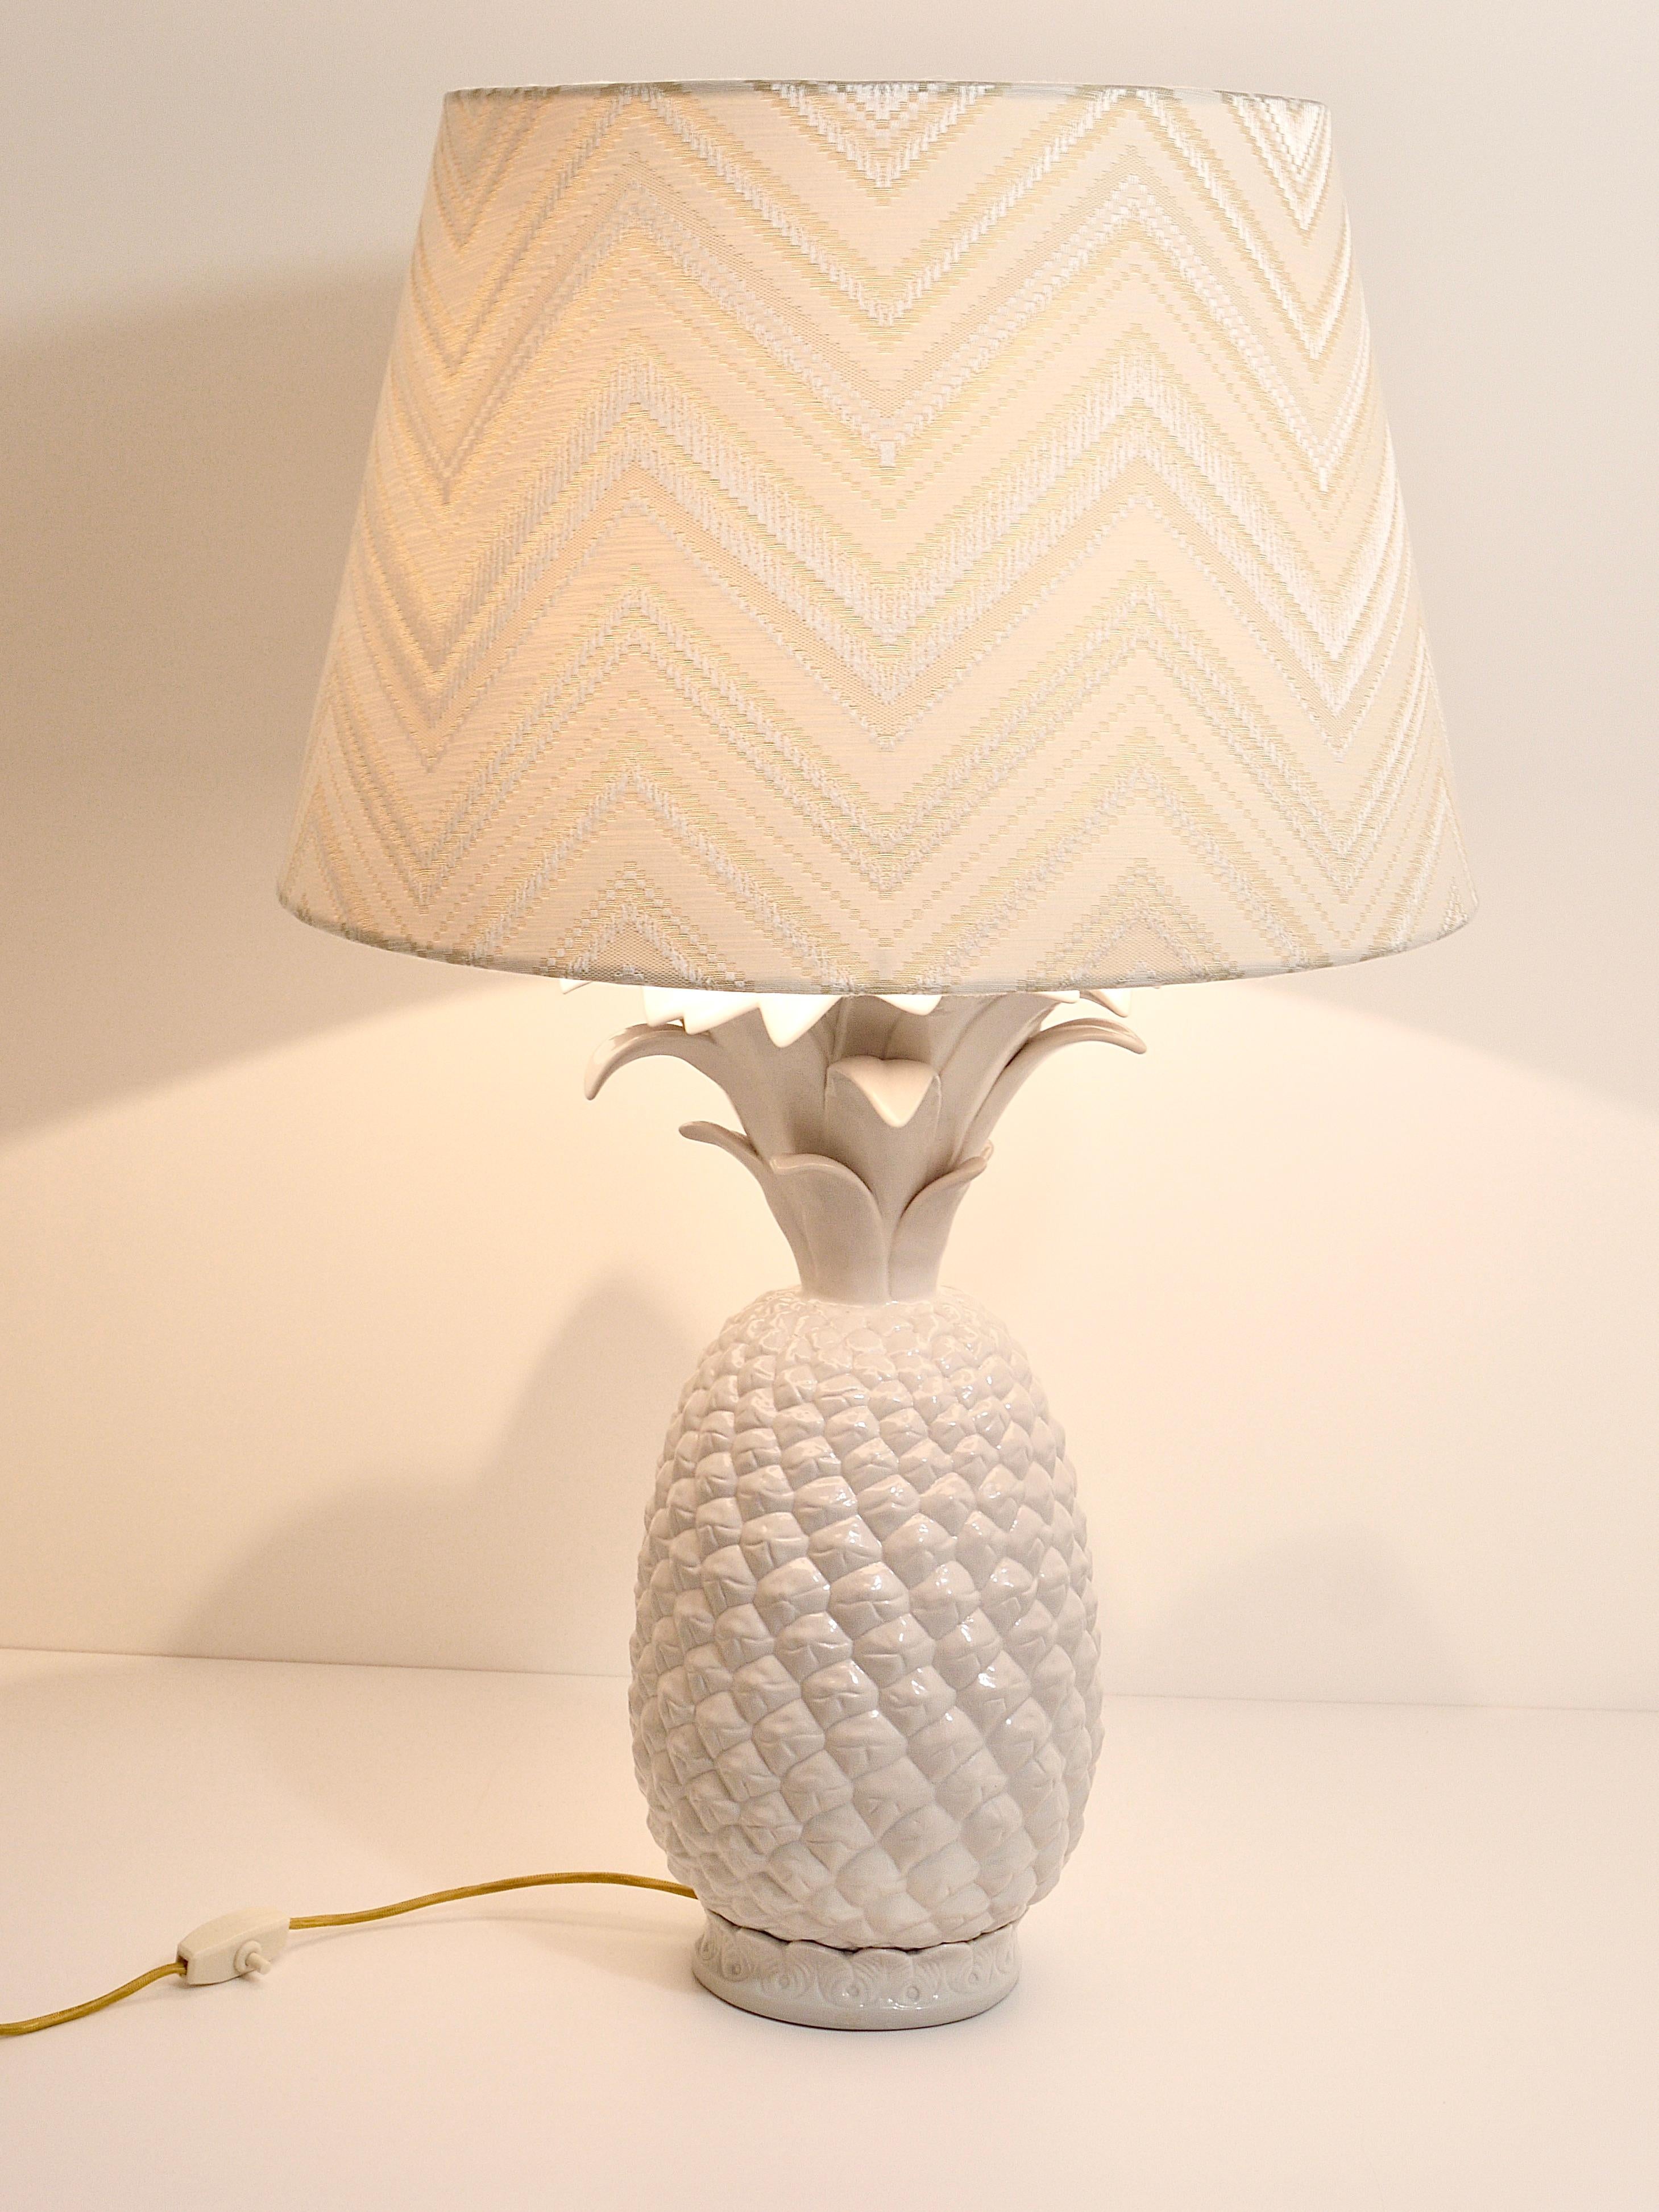 A beautiful and decorative table lamp / side lamp in the shape of a pineapple with leaves from the 1970s. Made in Italy. In the style of Tommasi Barbi. The base is made of white-glazed ceramic. Comes with a professionally refurbished lampshade,